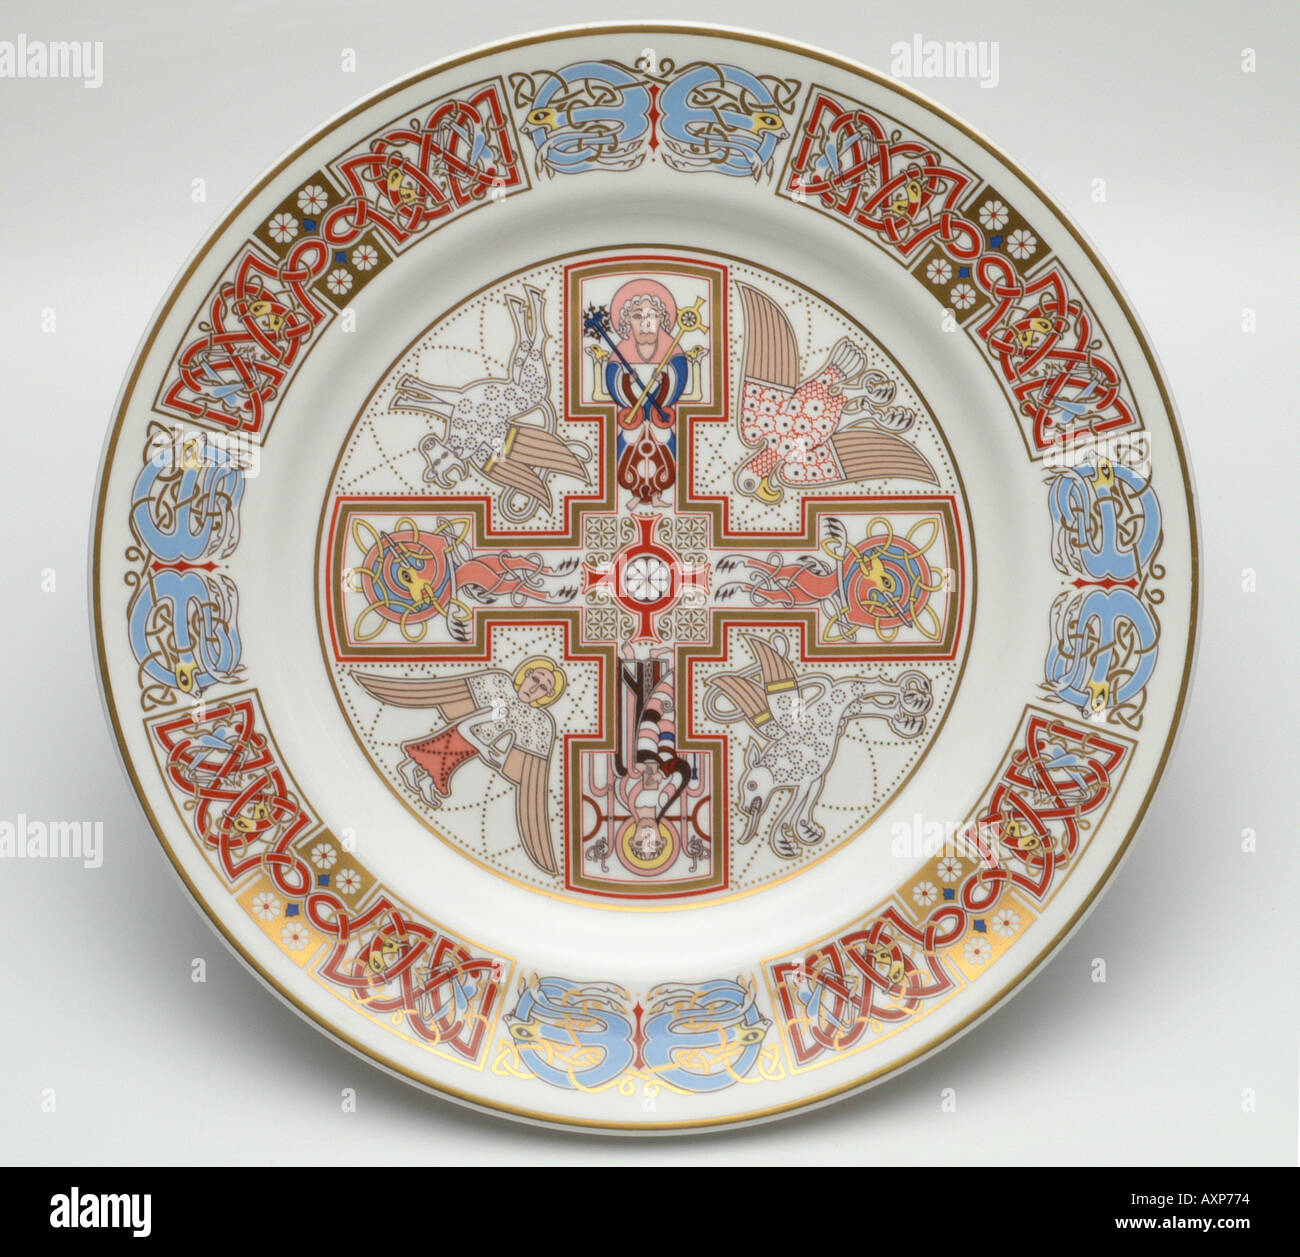 saint Chad Spode china plates with Celtic designs inspired by the Christian Gospels Stock Photo